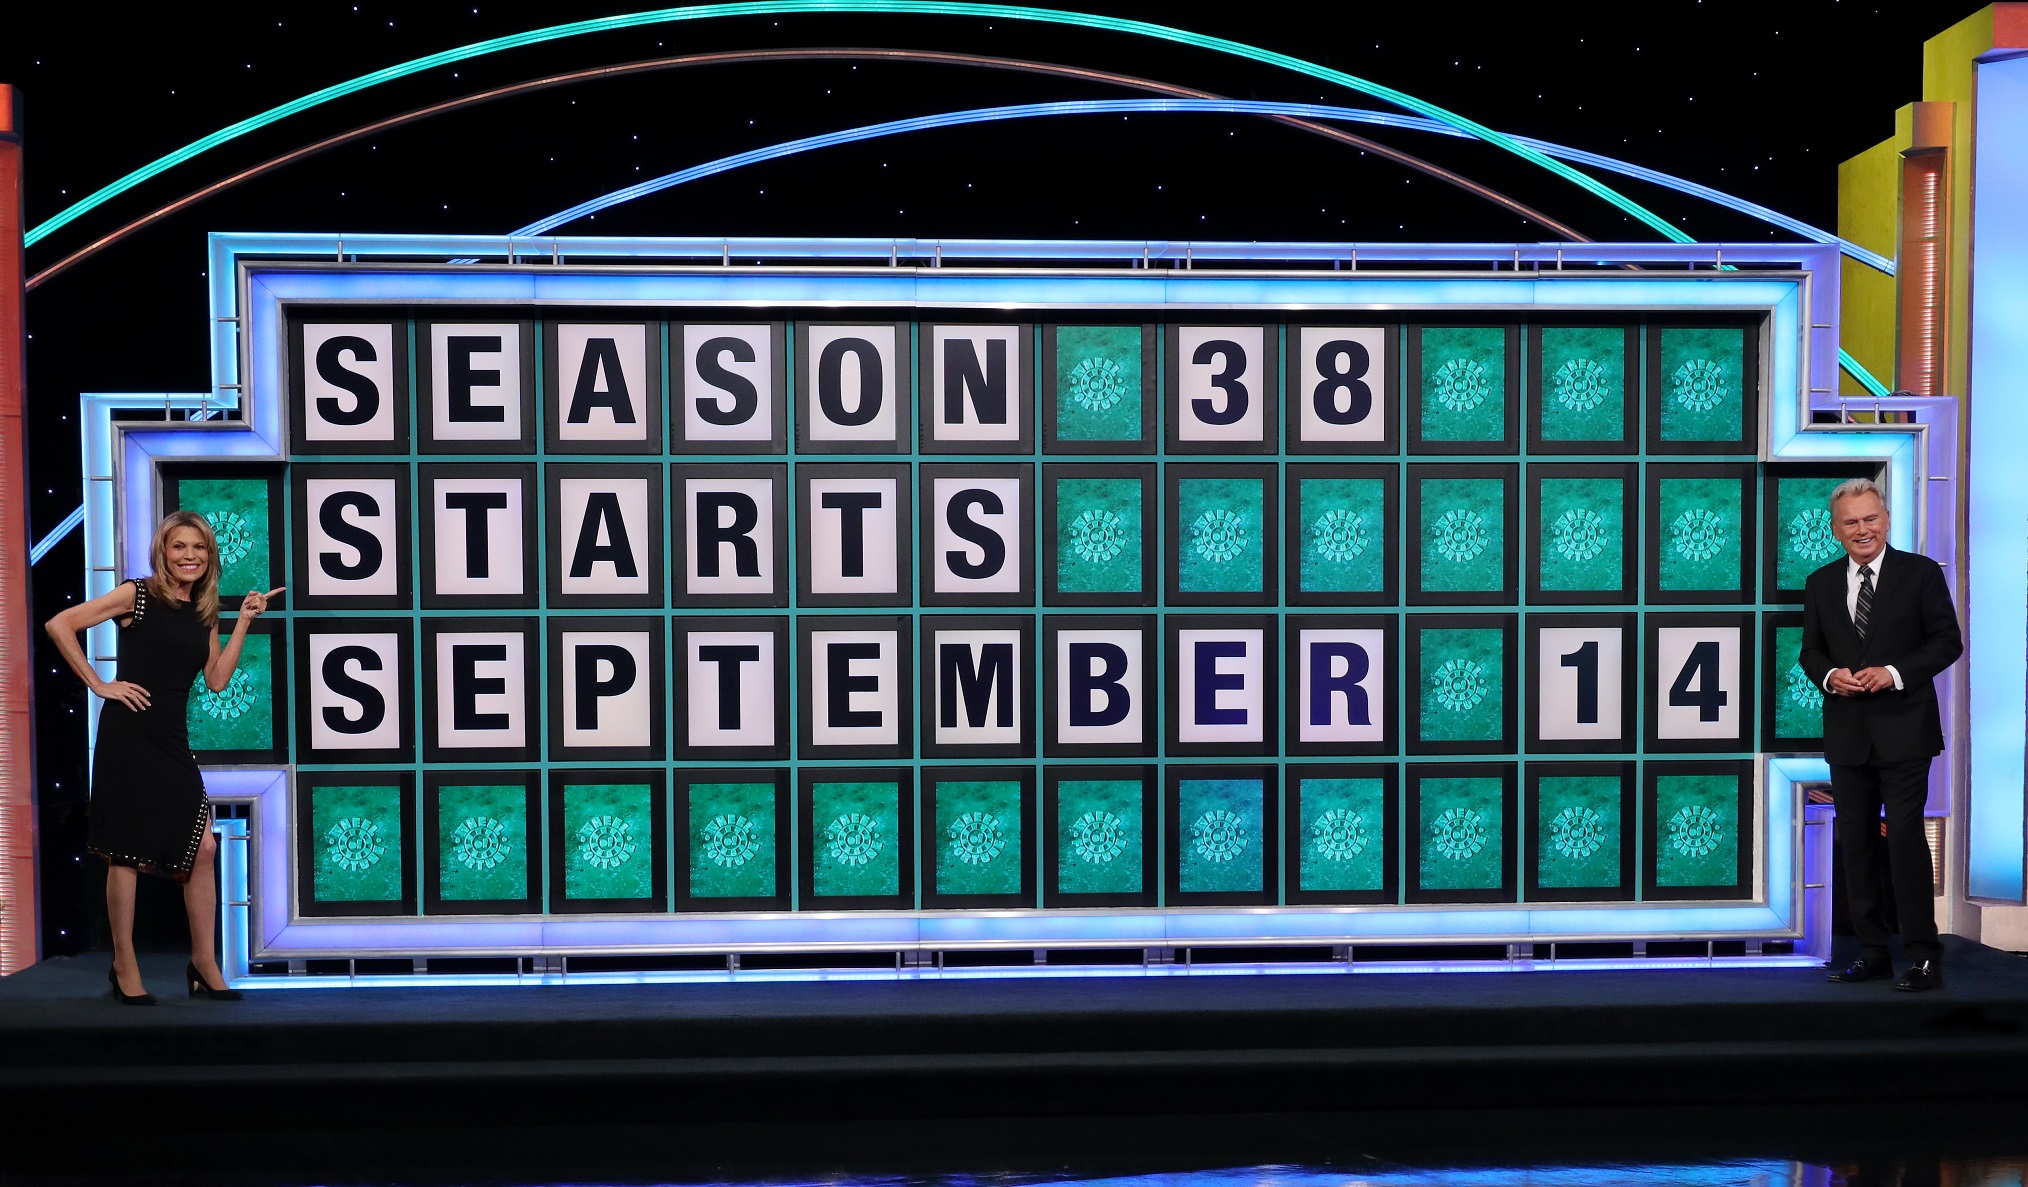 'Wheel of Fortune' Sets Season 38 Premiere, Teases Changes Behind the